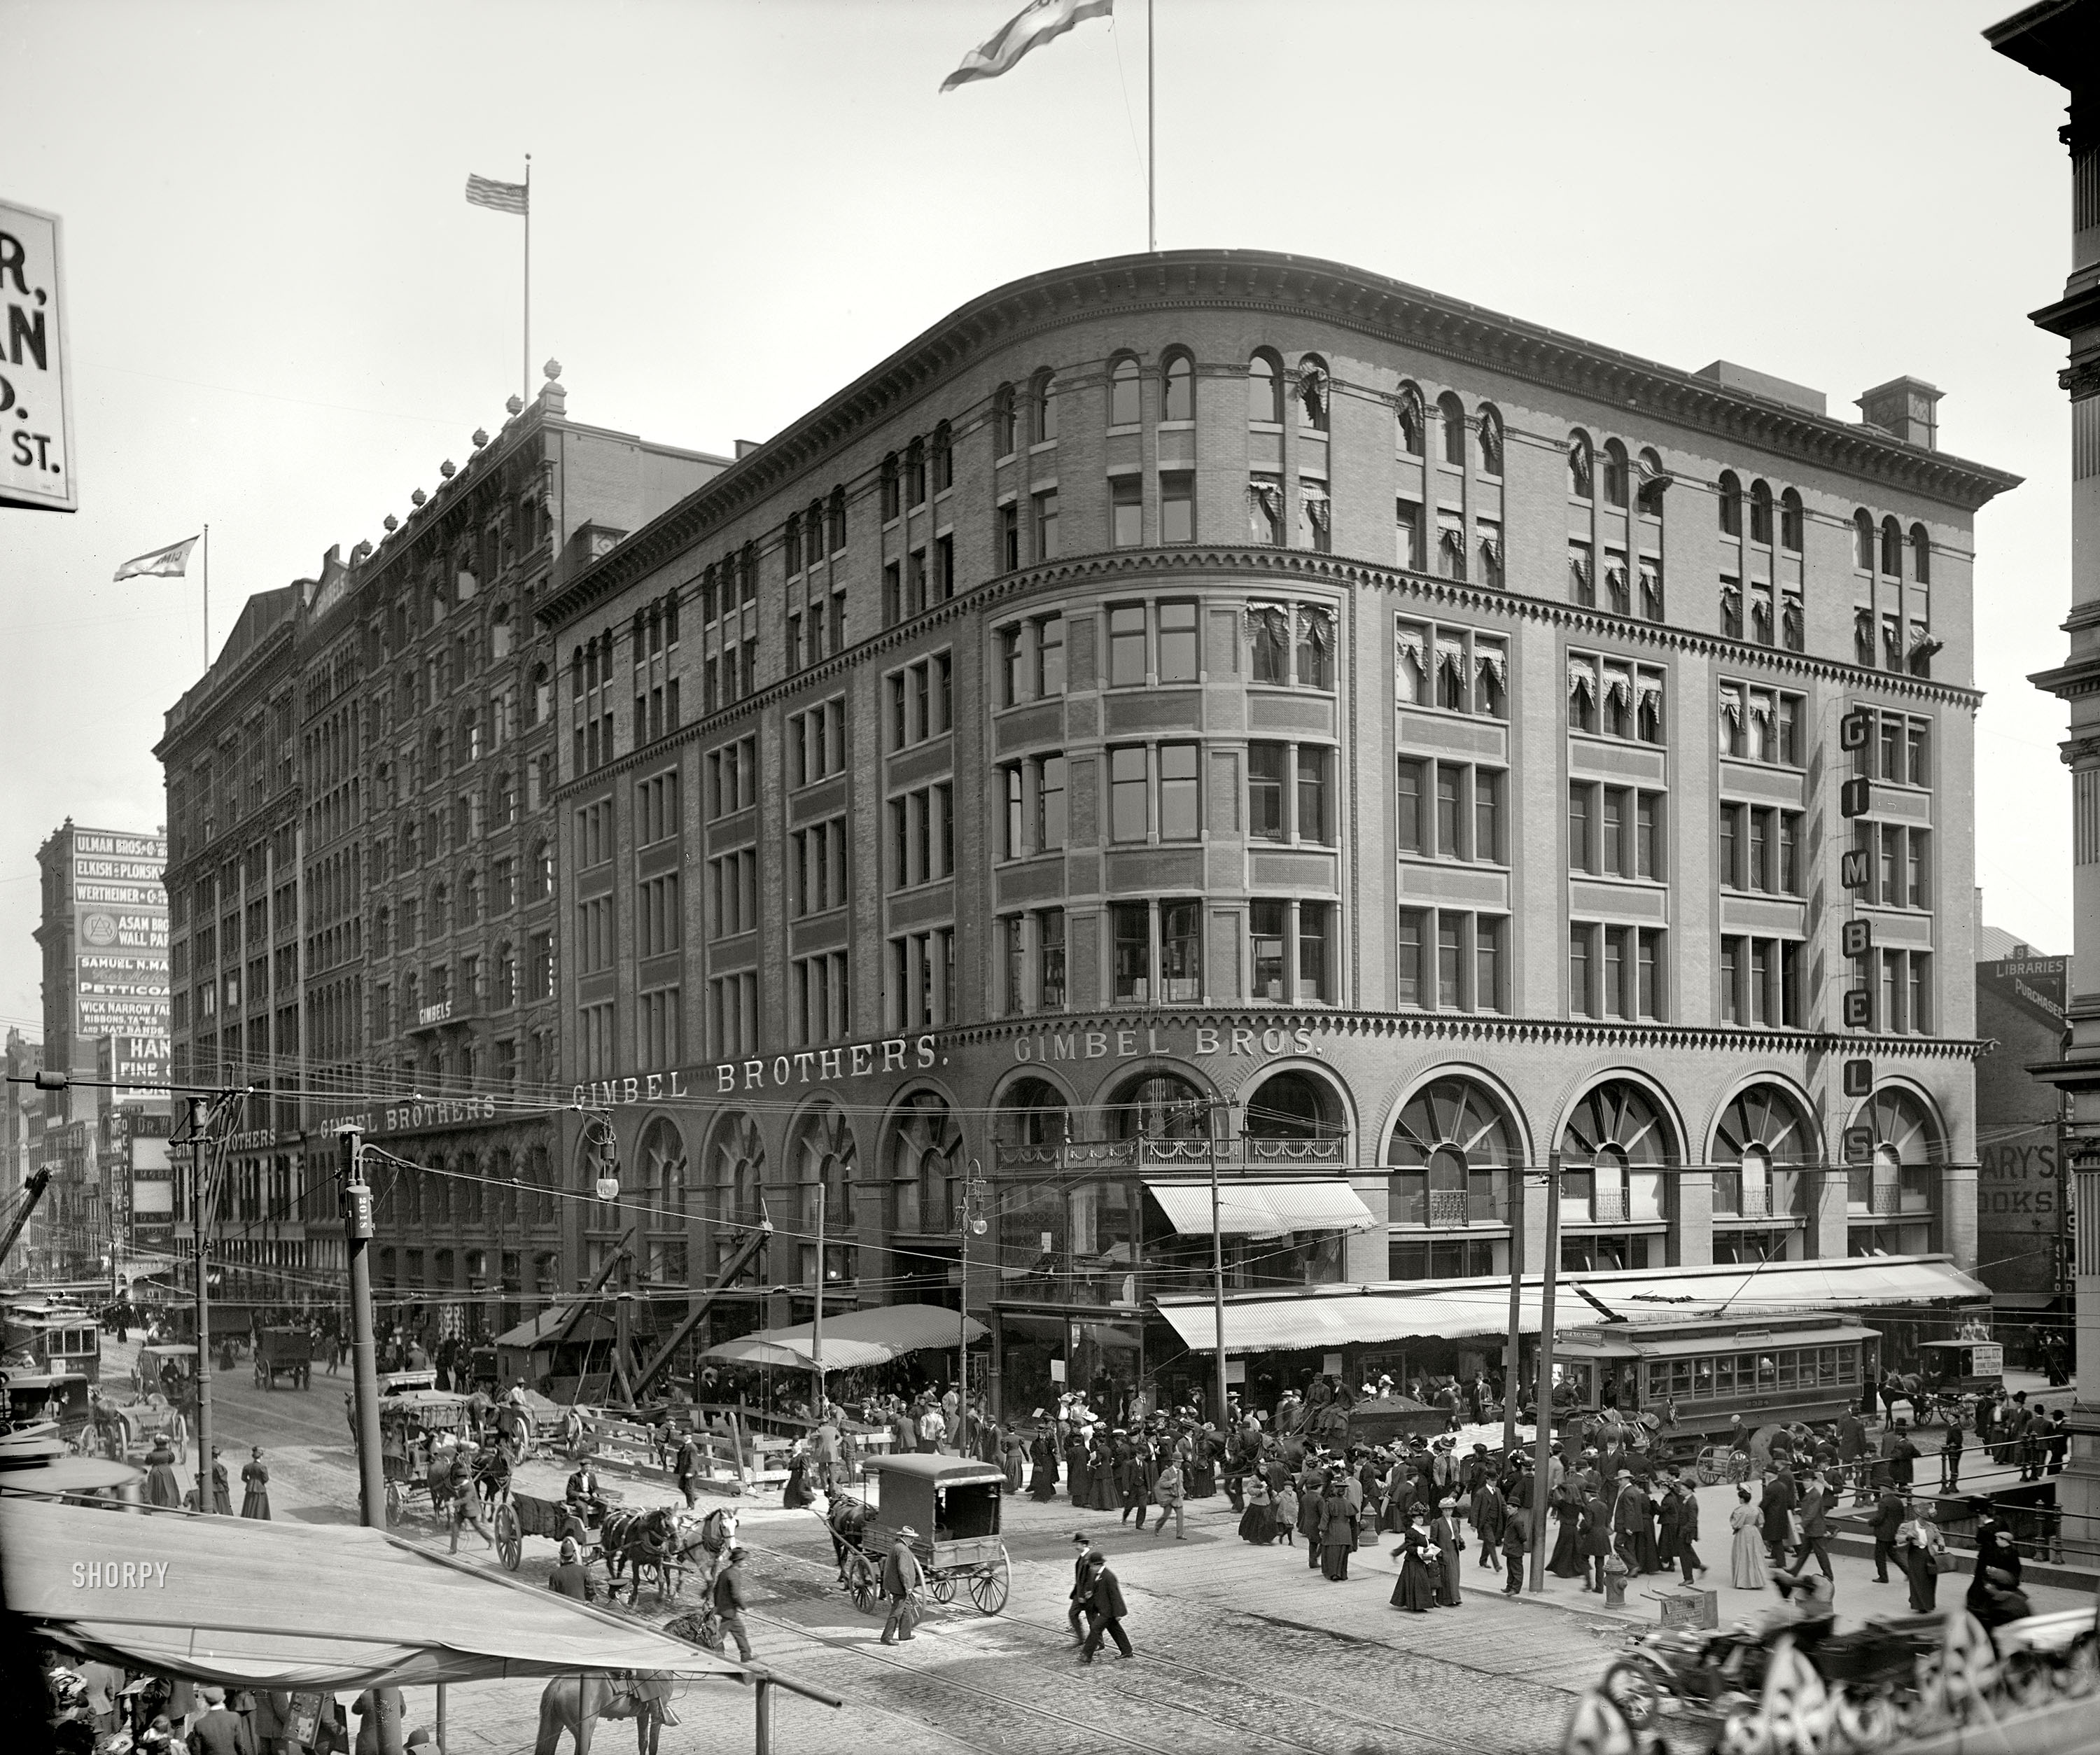 Philadelphia circa 1905. "Gimbel Brothers store, Market and 9th." 8x10 inch dry plate glass negative, Detroit Publishing Company. View full size.